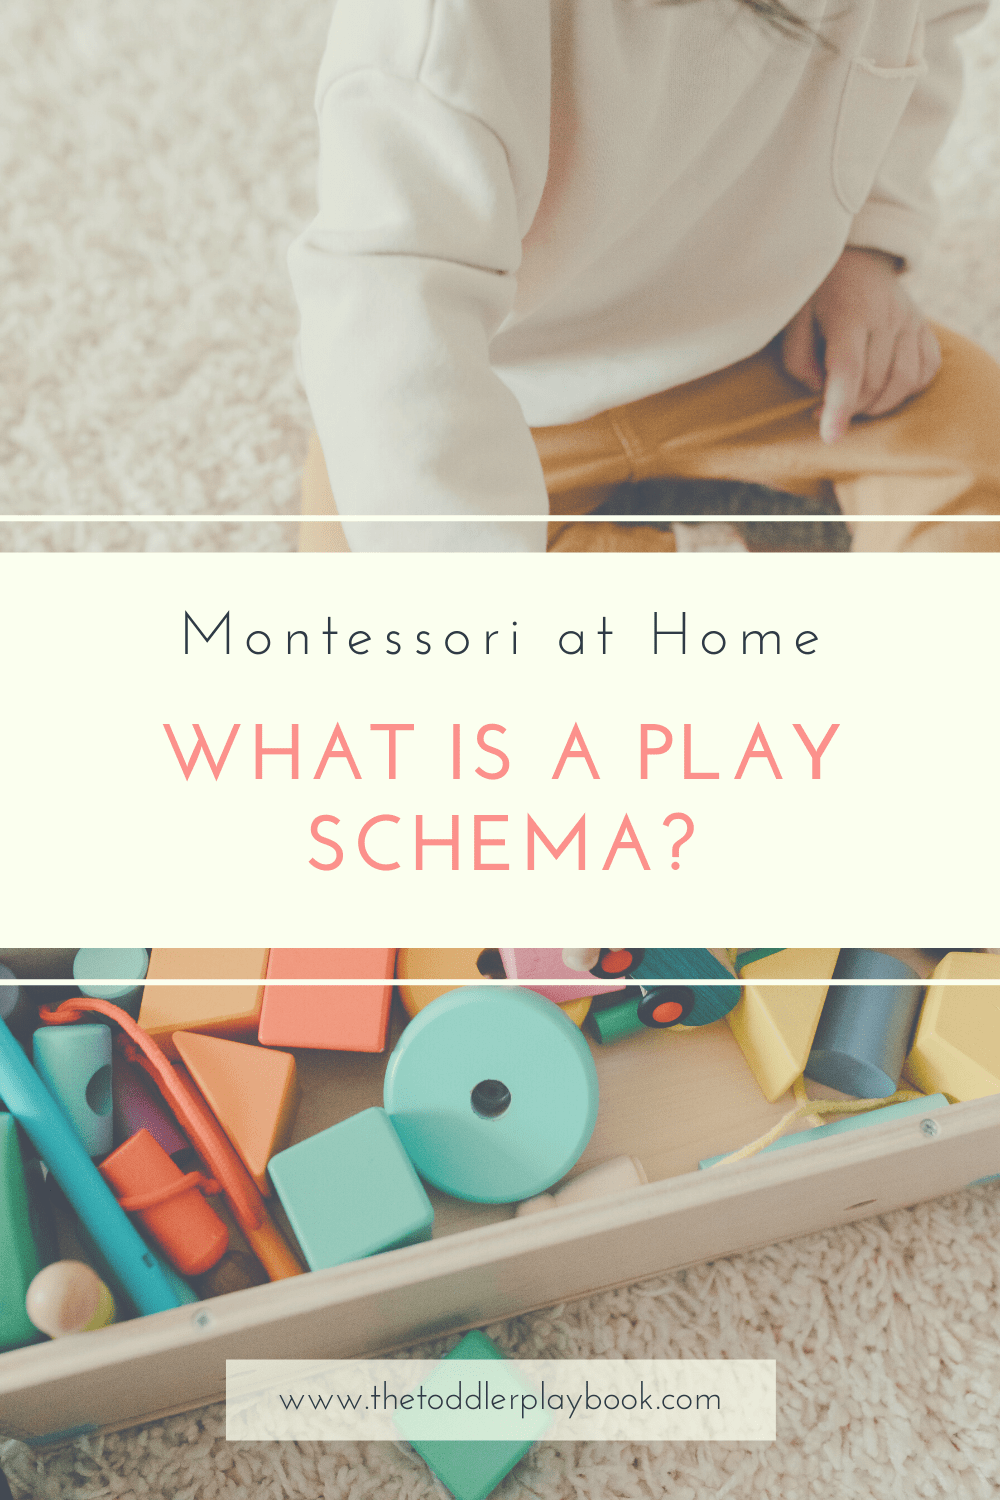 What is a play schema?